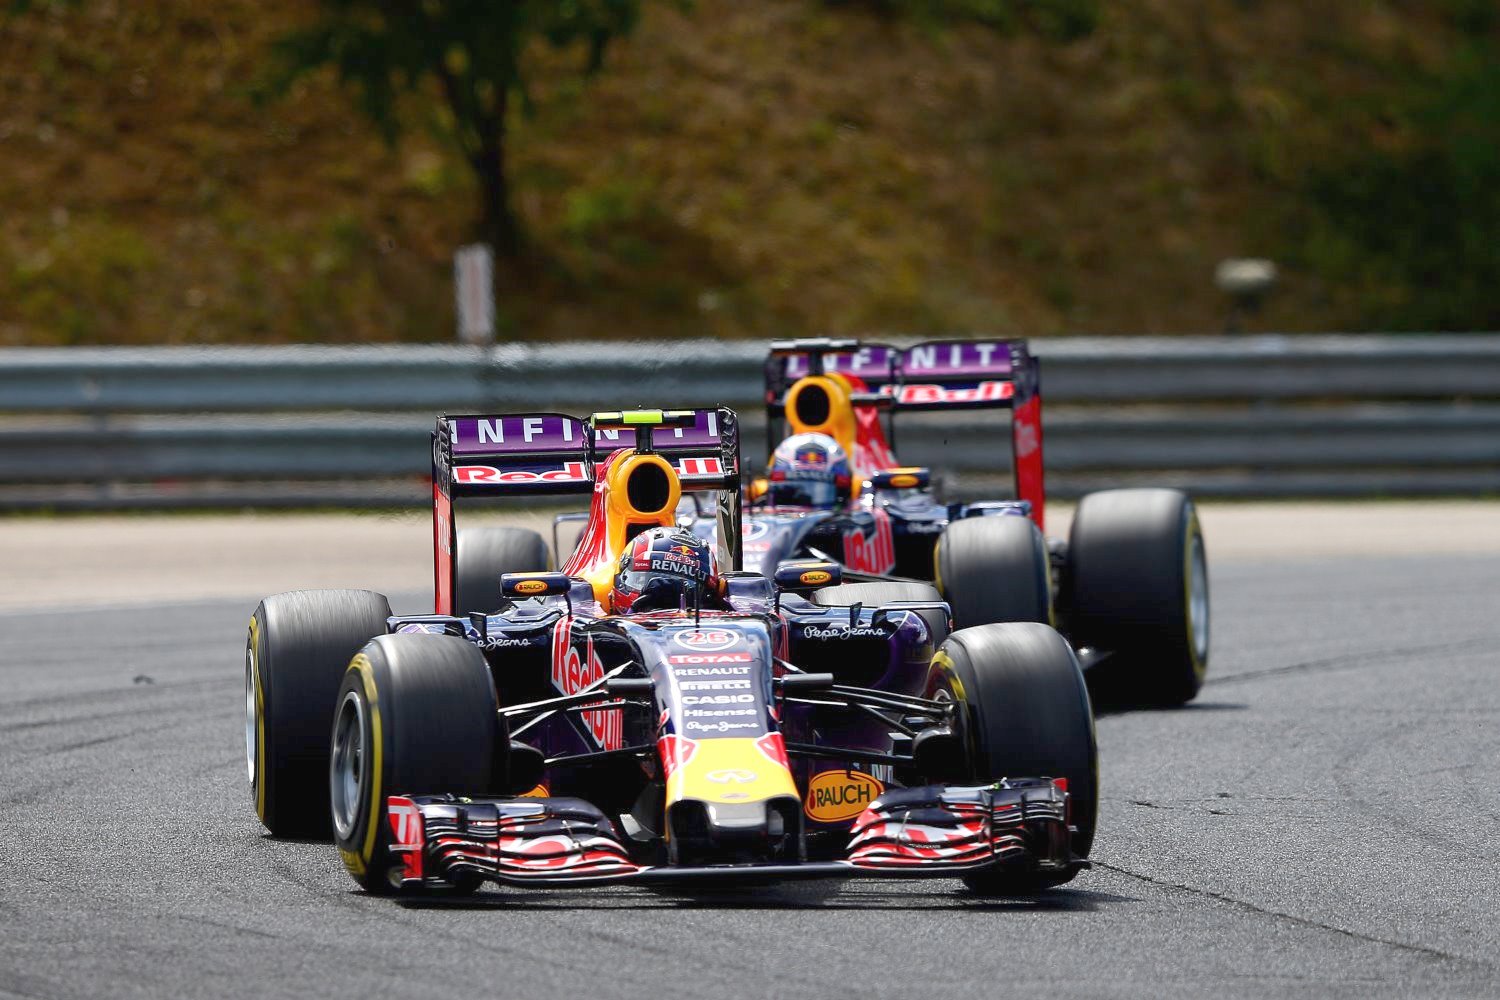 No more Renault power for the Red Bulls.  They will likely have Ferrari engines next.